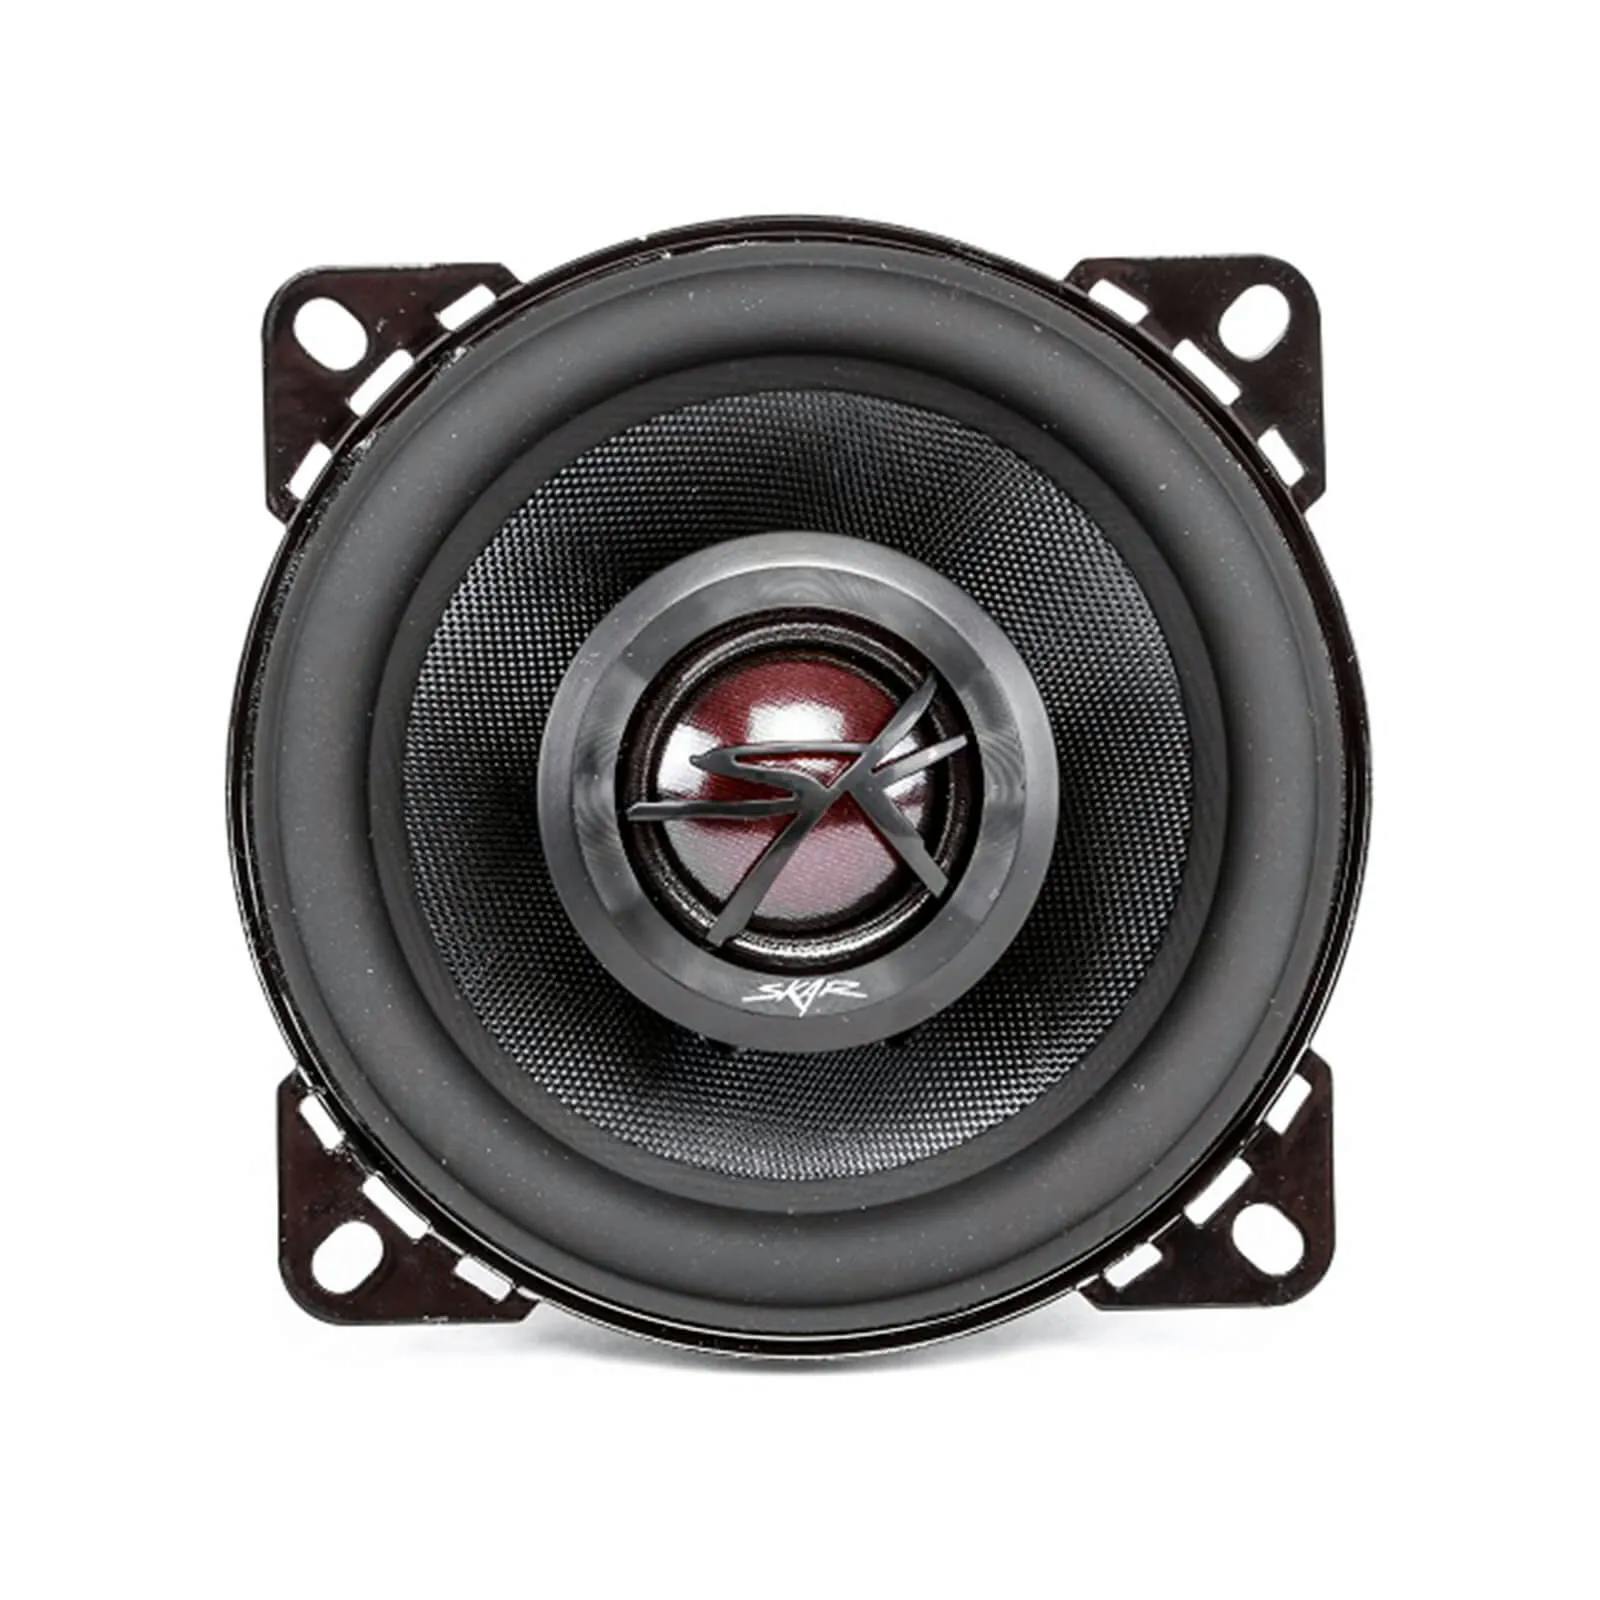 Featured Product Photo 1 for TX4 | 4" 120 Watt Elite Coaxial Car Speakers - Pair